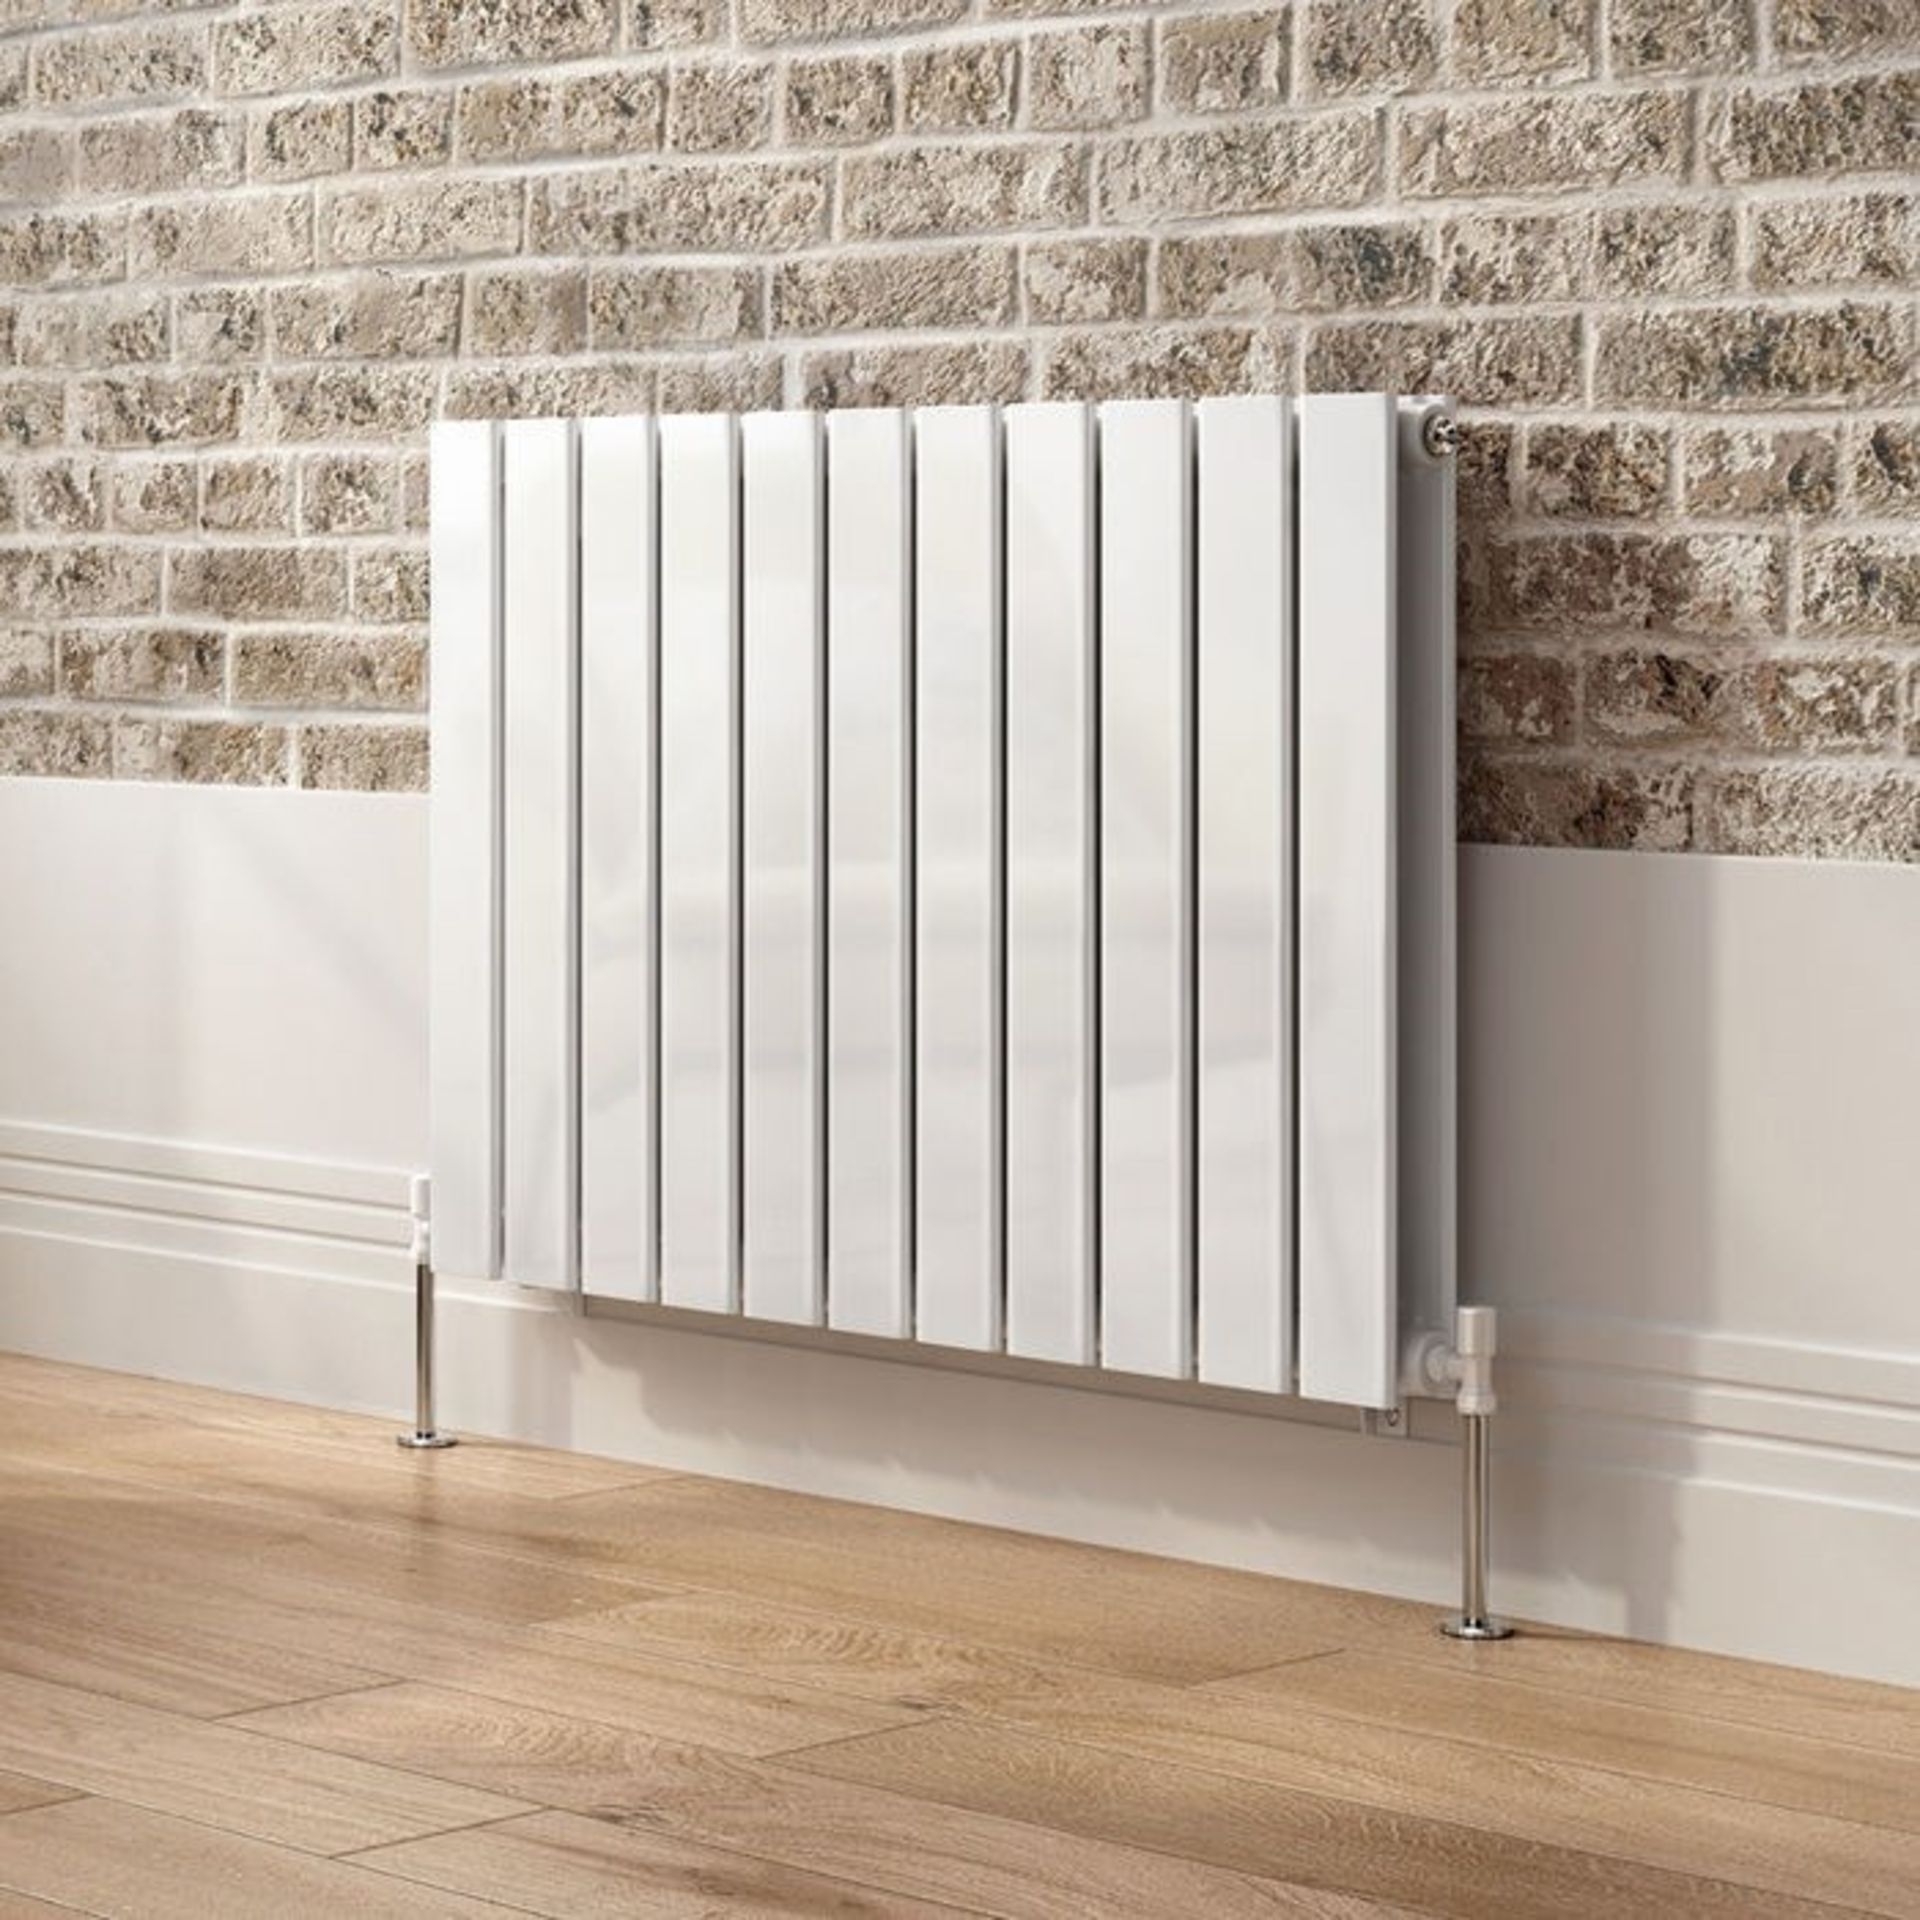 Brand New 600x830mm Gloss White Double Flat Panel Horizontal Radiator. RRP £474.99.RC221.Made with h - Image 2 of 3